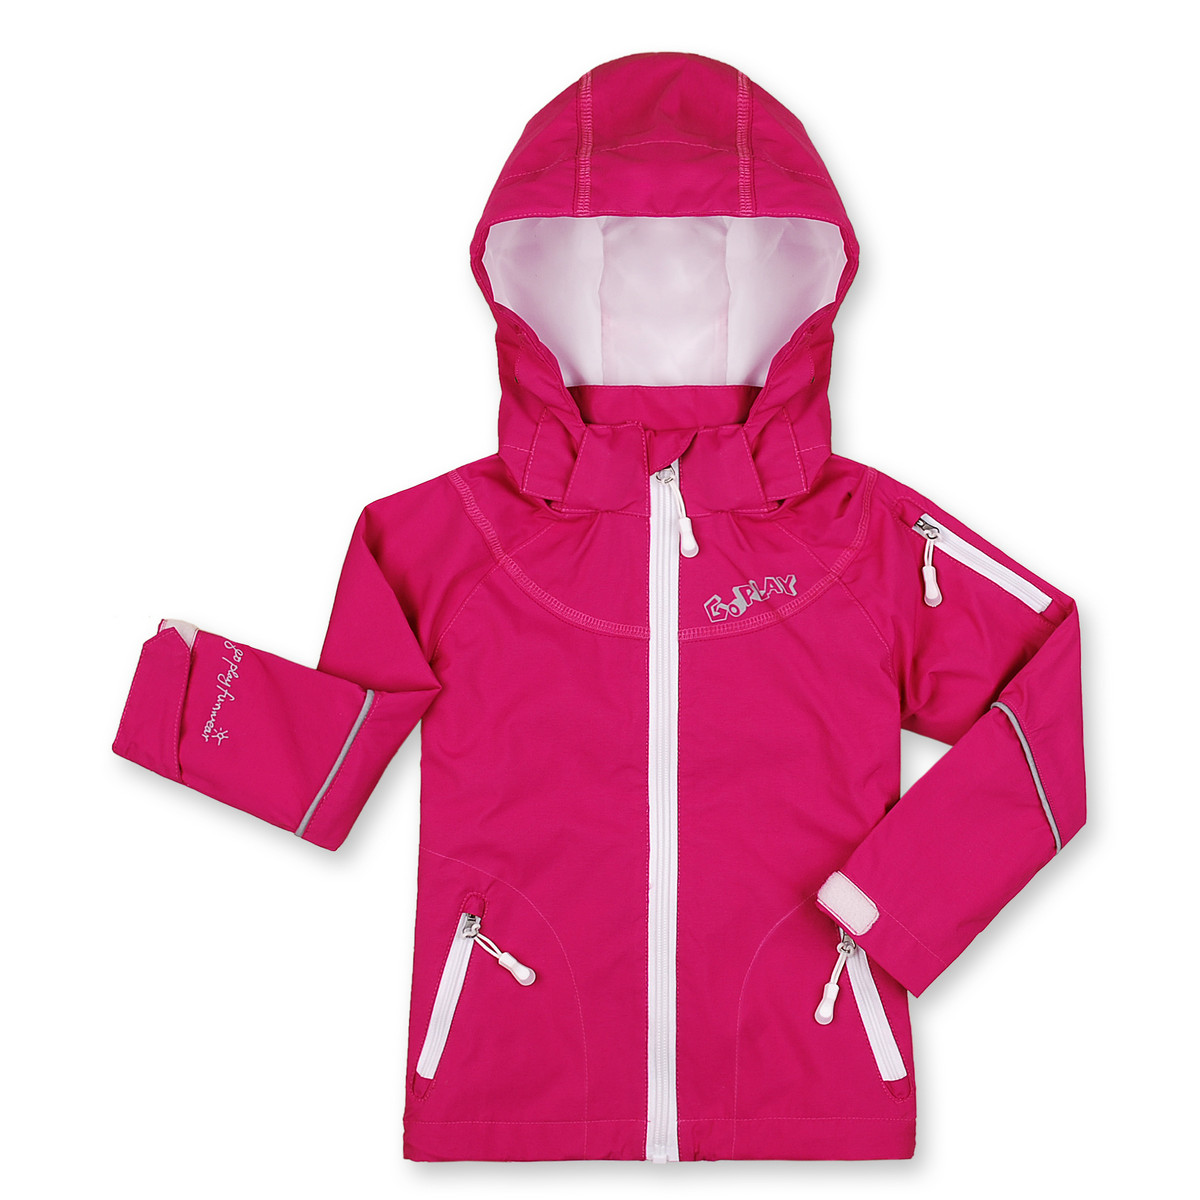 2013 spring and autumn children's clothing girls child windproof waterproof outerwear hooded trench